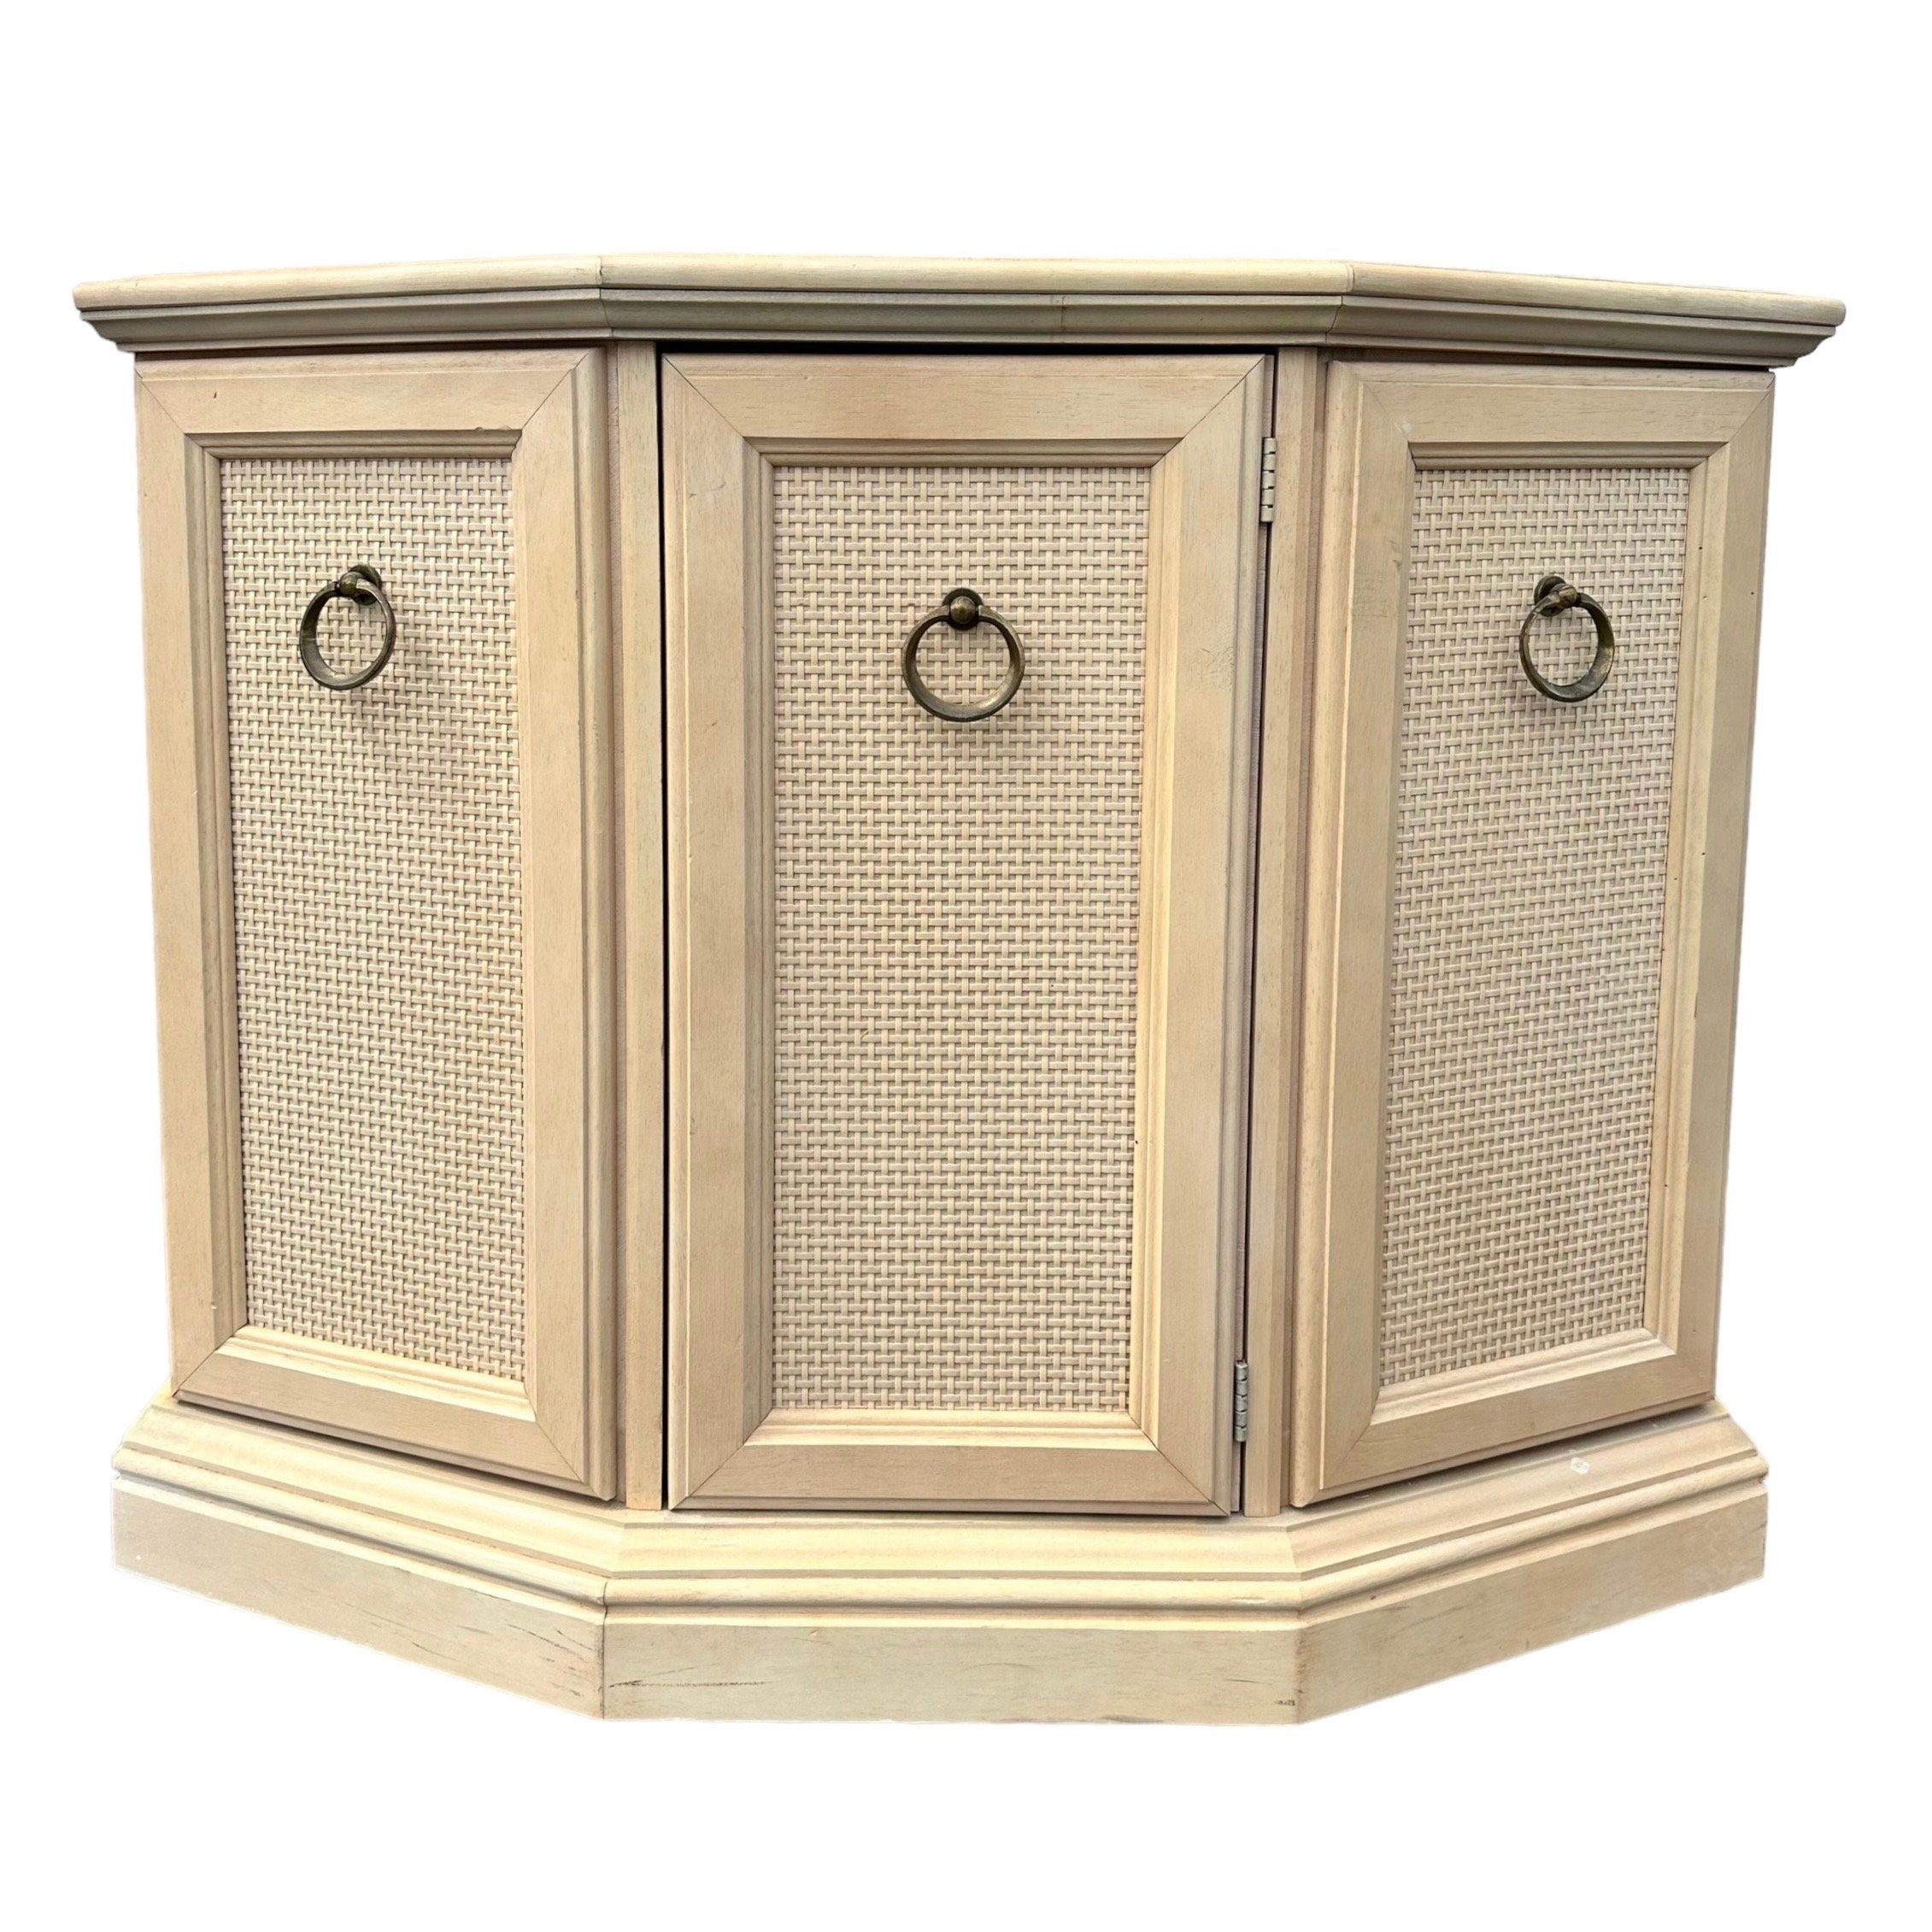 Vintage Entry Cabinet with Faux Rattan Wicker 36x14x29 - Hollywood Regency Coastal Narrow Accent Table or Bathroom Furniture 